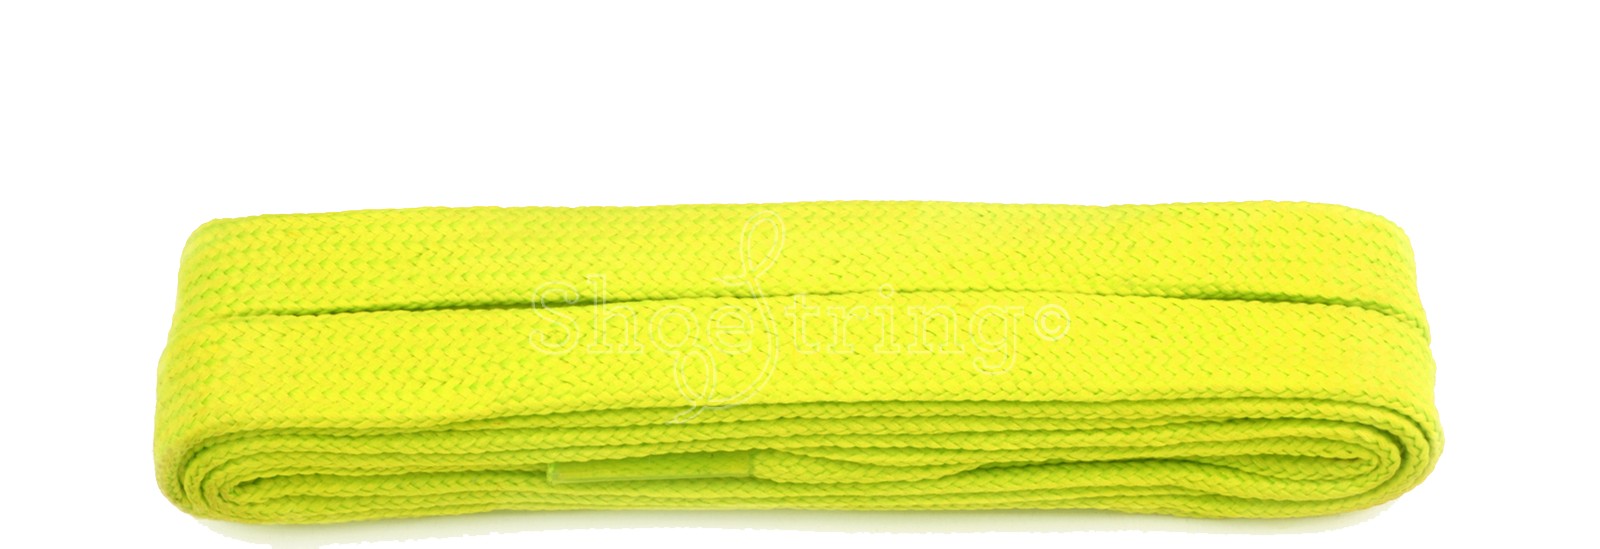 Flo Yellow Flat 9mm Laces